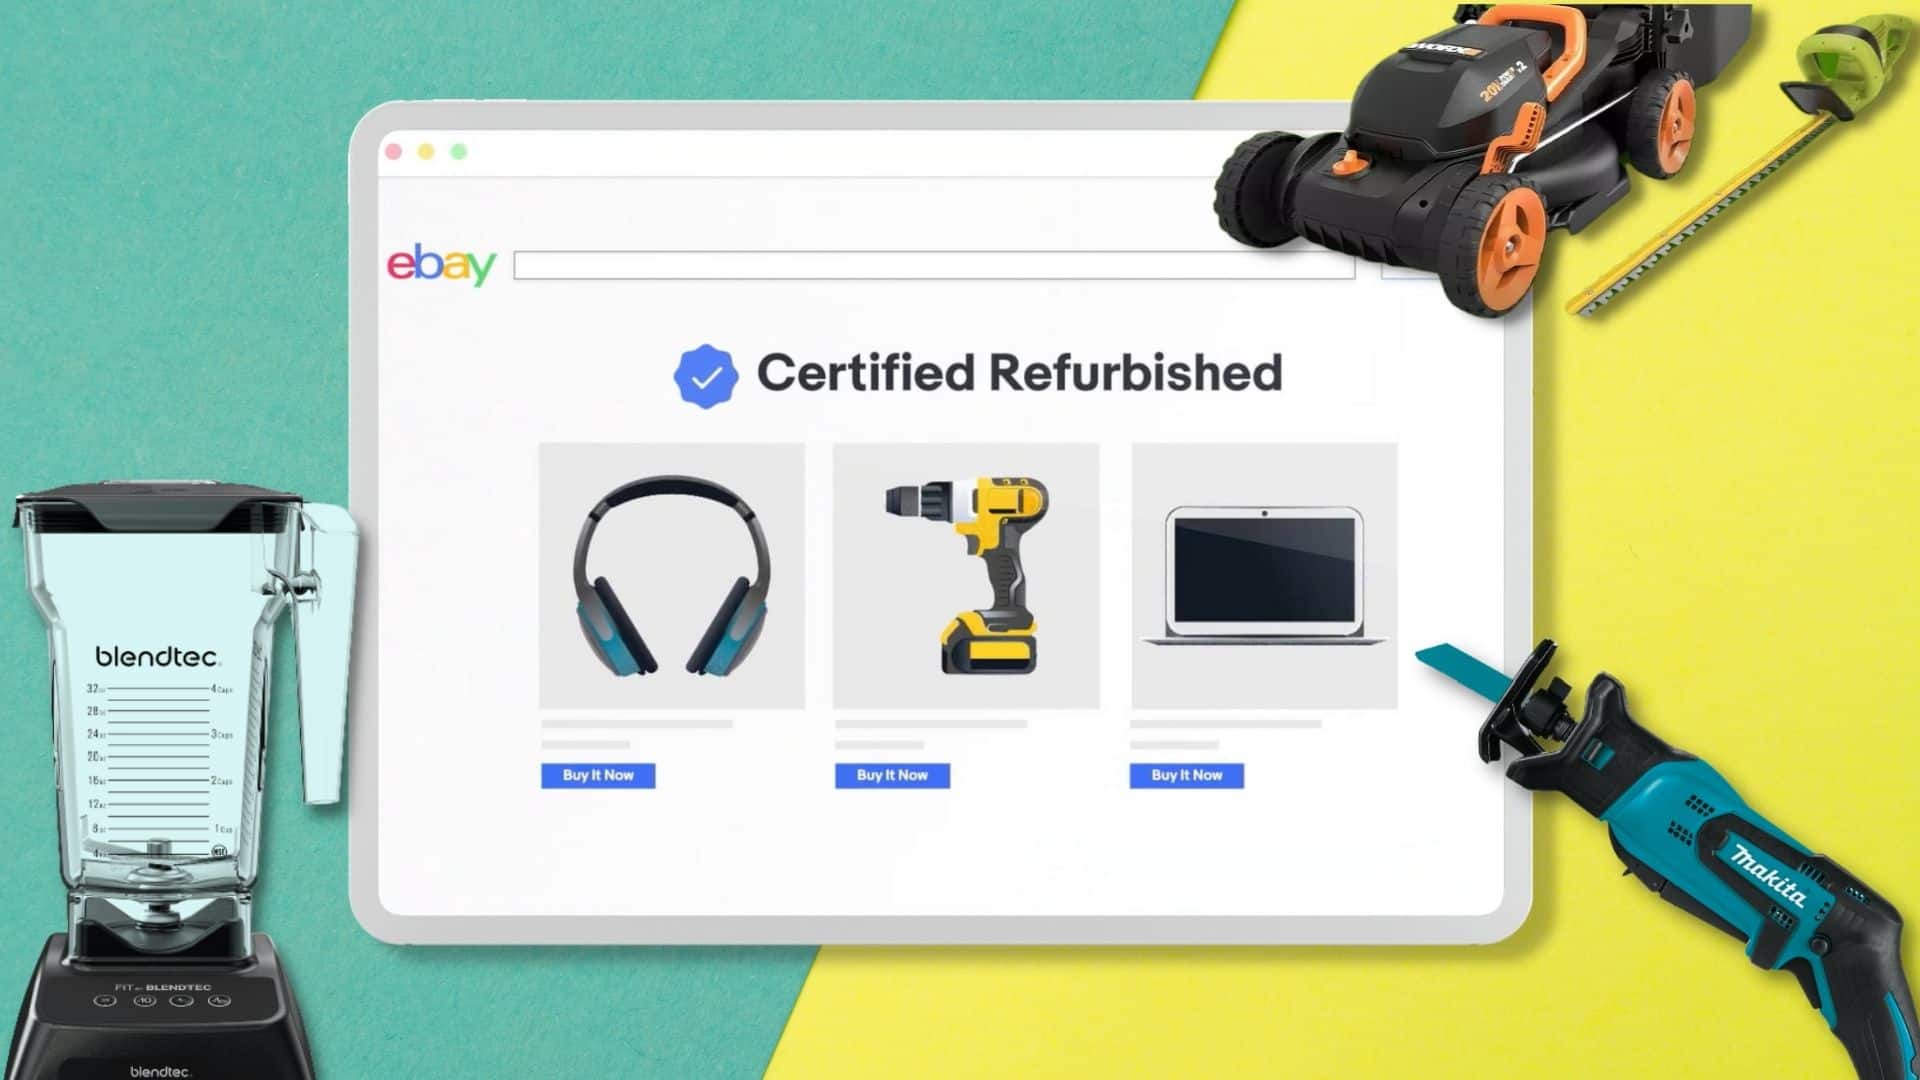 ebay certified refurbished graphic and products